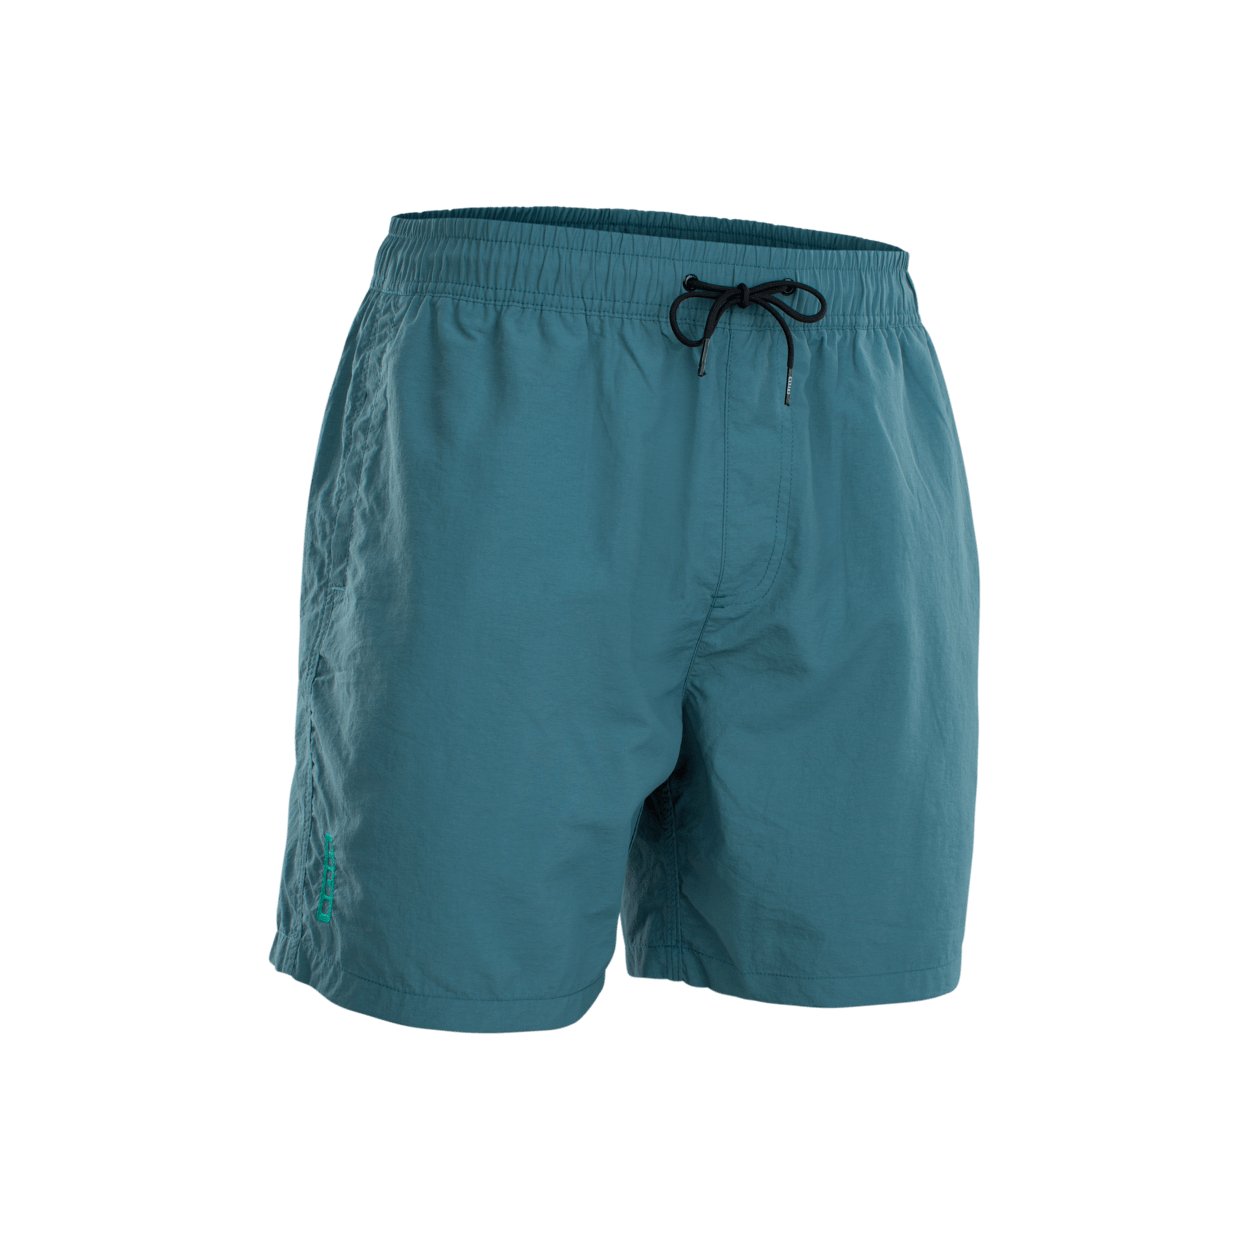 ION Men Boardshorts Volley 17" 2022 - Worthing Watersports - 9008415902644 - Apparel - ION Bike